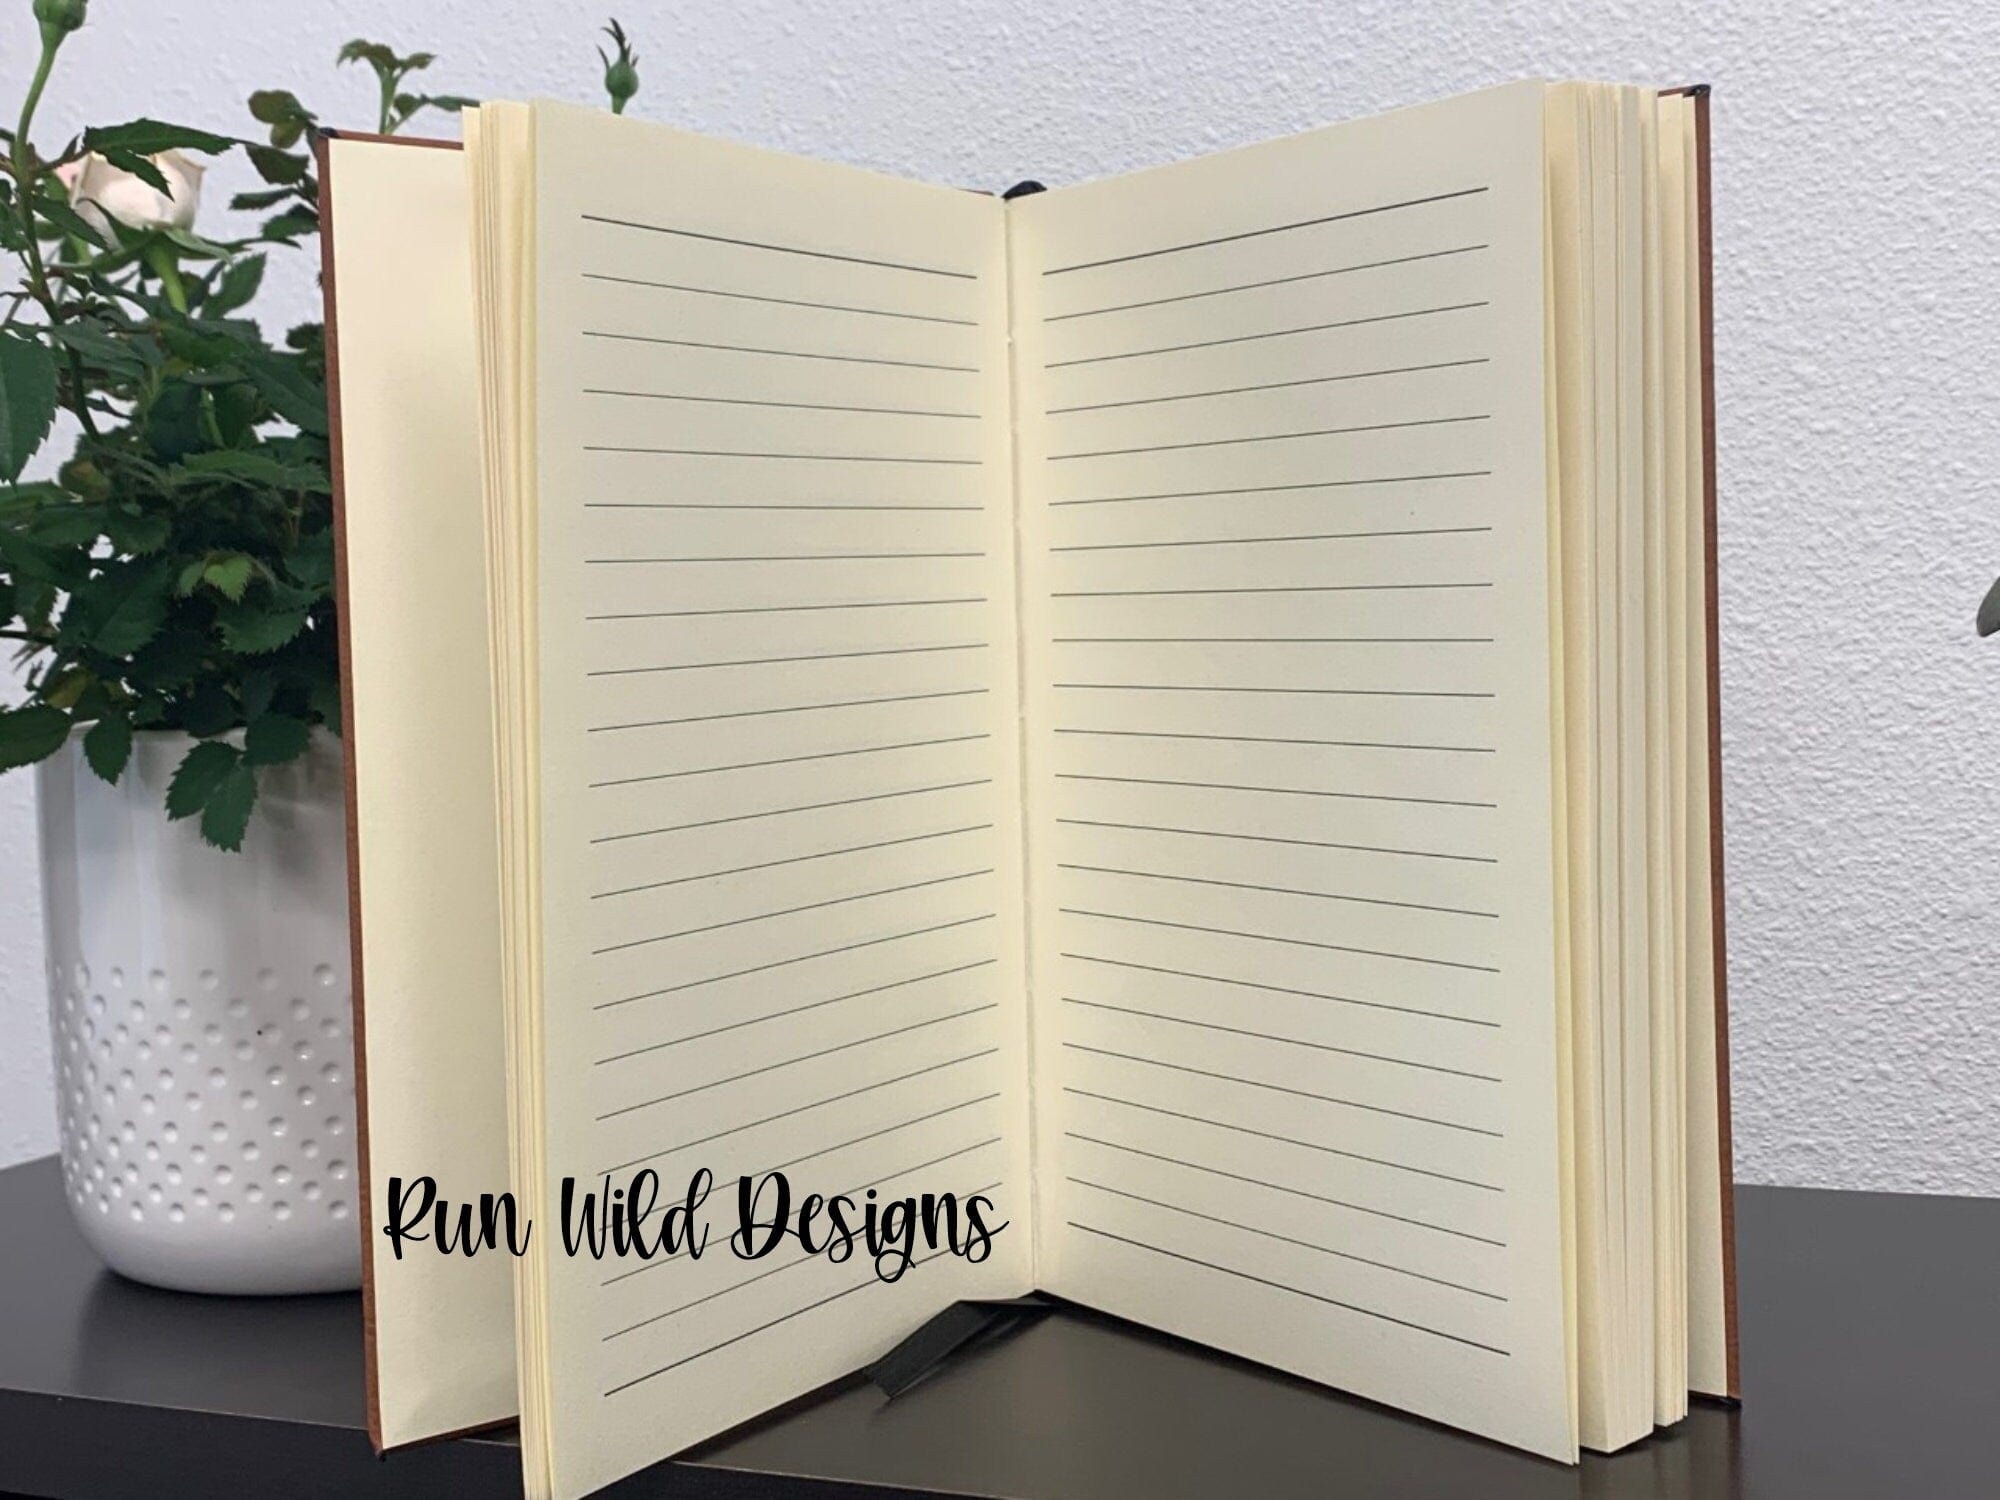 Leatherette journal Leatherette Journal Name Personalized Lined Leatherette Journal For Women